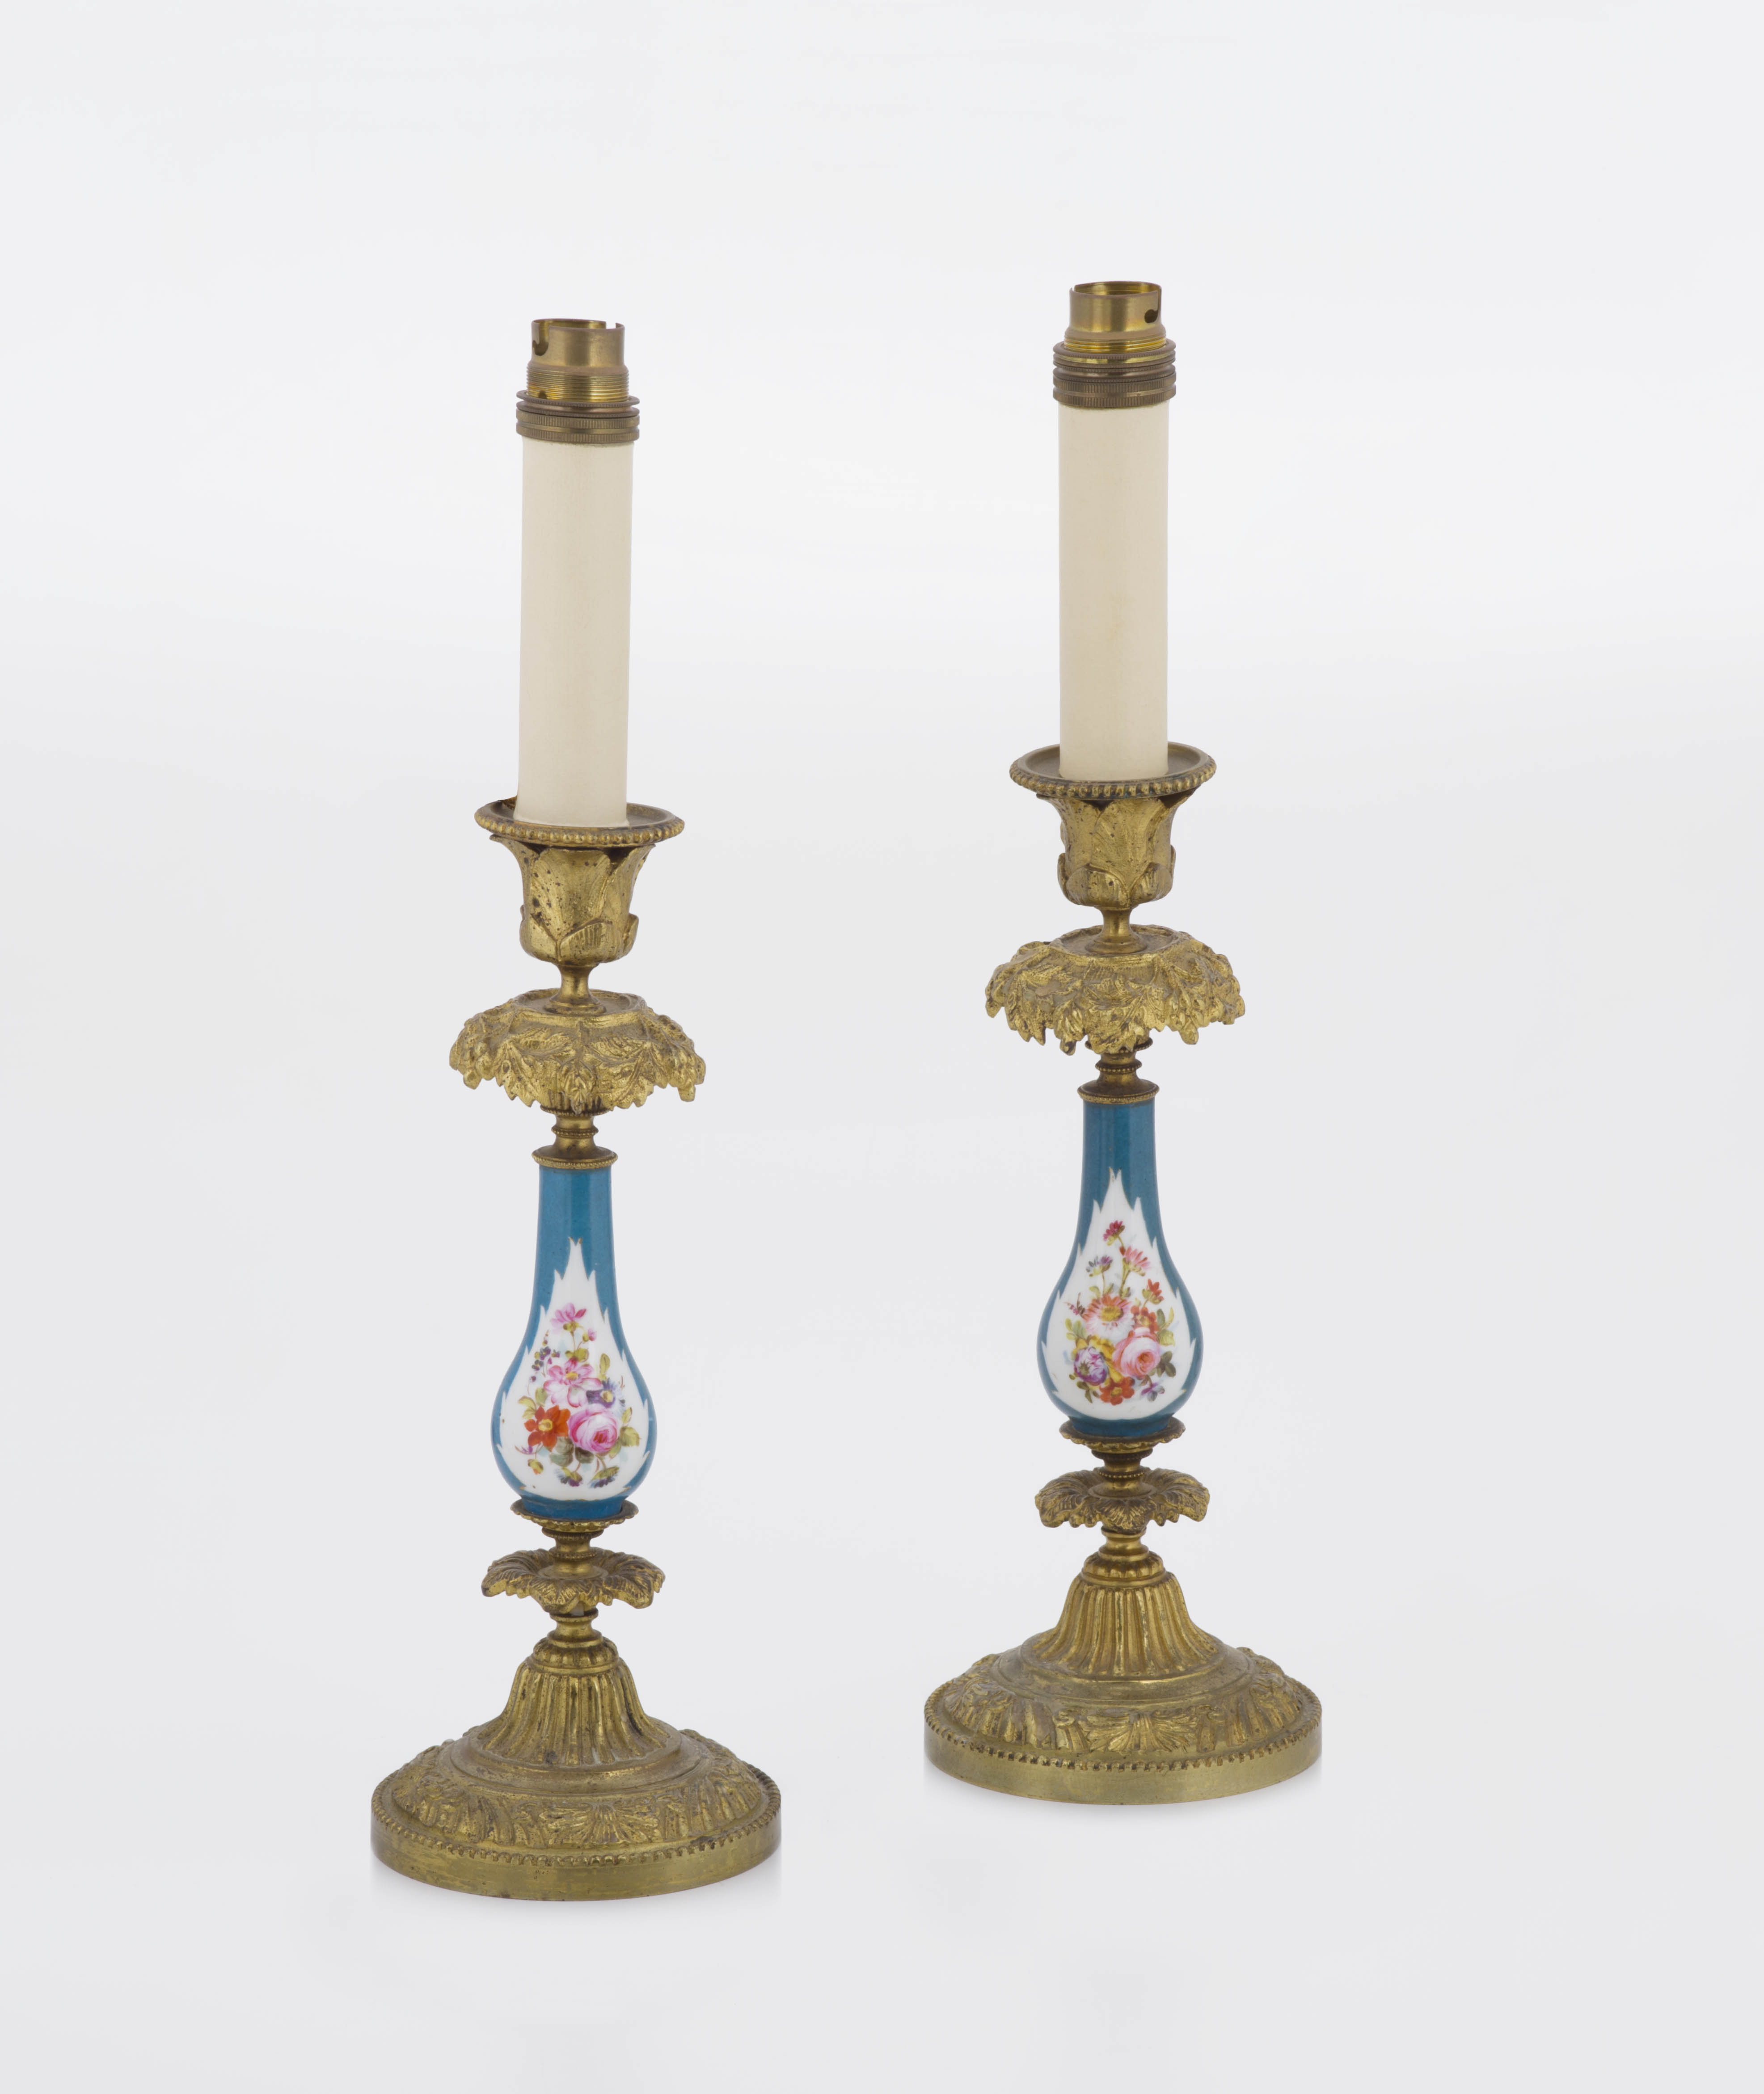 A pair of porcelain gilt-metal mounted table lamps, late 19th century